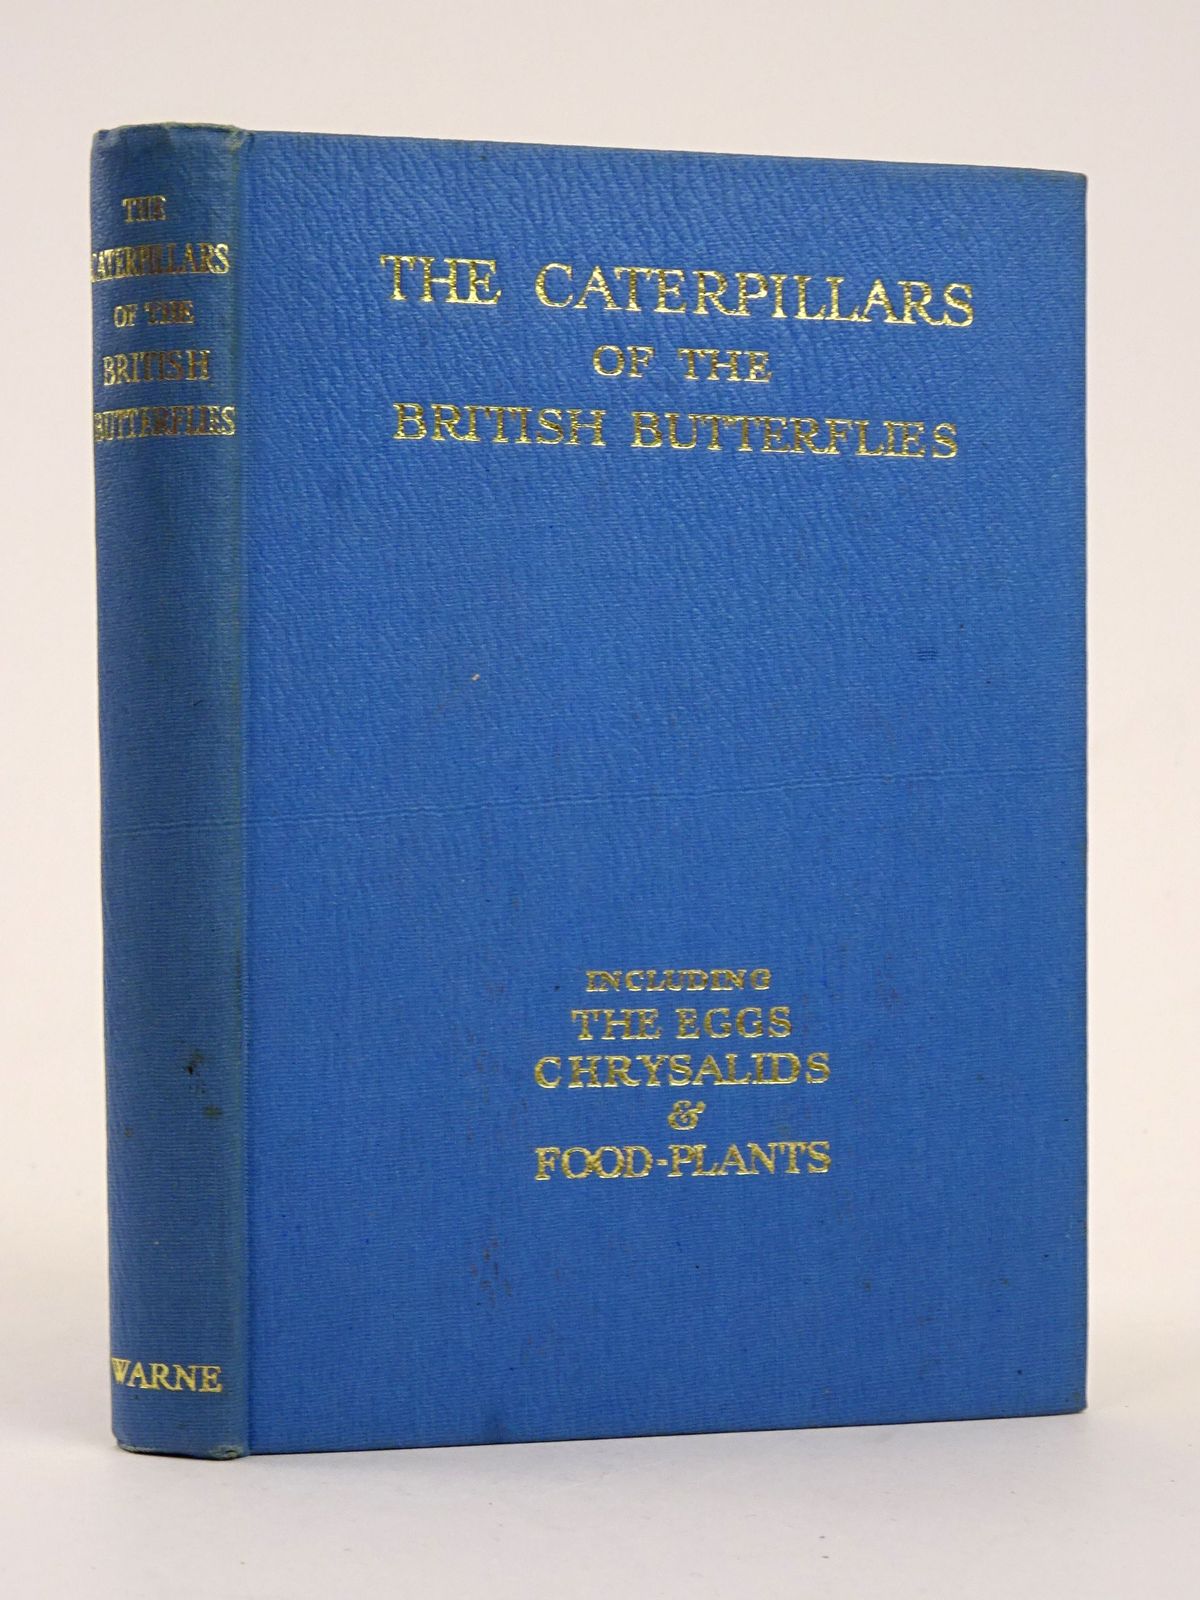 Photo of THE CATERPILLARS OF THE BRITISH BUTTERFLIES INCLUDING THE EGGS, CHRYSALIDS AND FOOD-PLANTS written by Stokoe, W.J. published by Frederick Warne &amp; Co Ltd. (STOCK CODE: 1818329)  for sale by Stella & Rose's Books